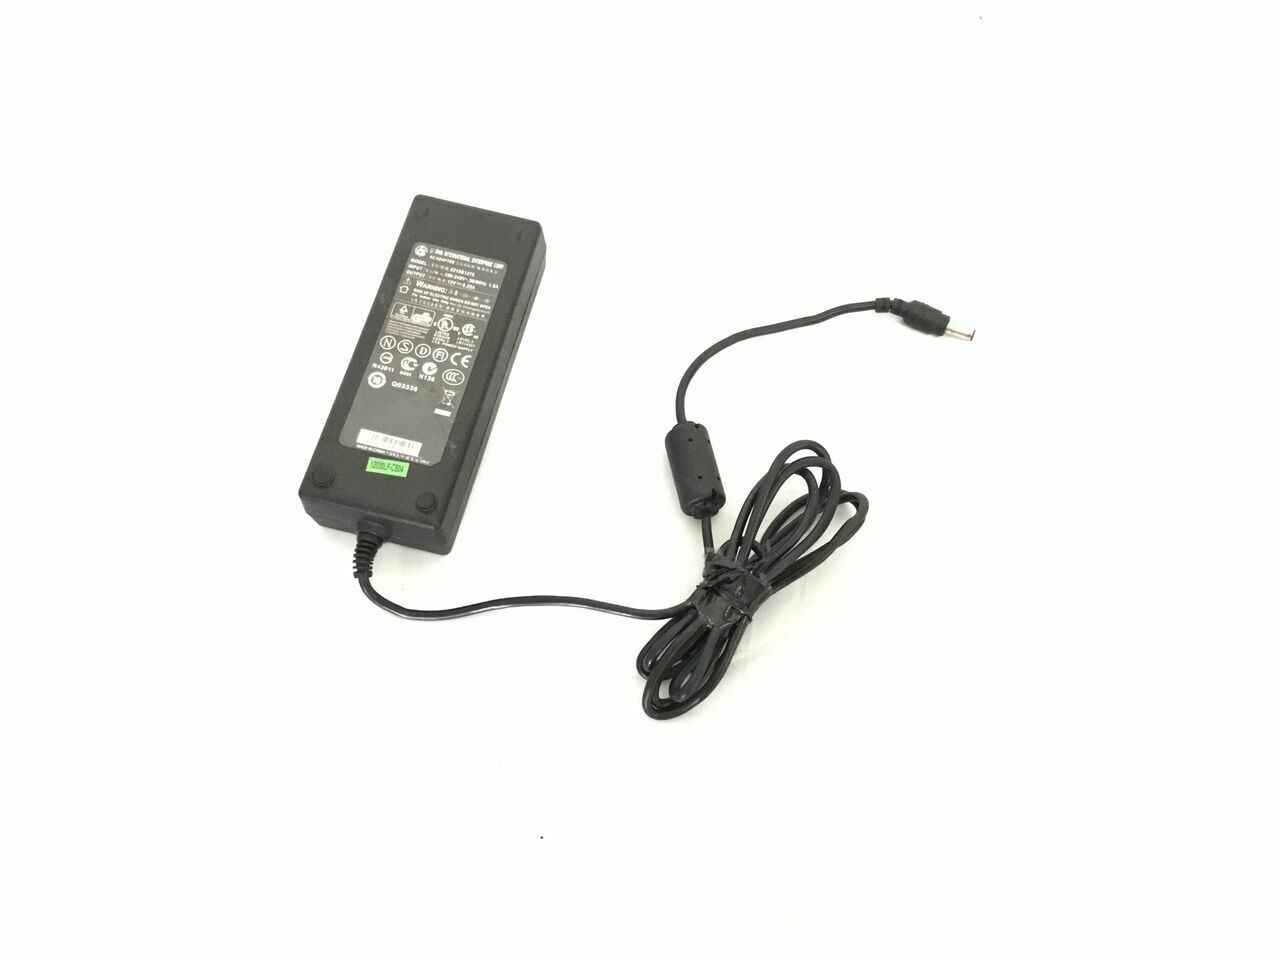 Precor Elliptical Power Supply Battery Charger AC Adaptor 12030LF-C804 58020-101 (Used)